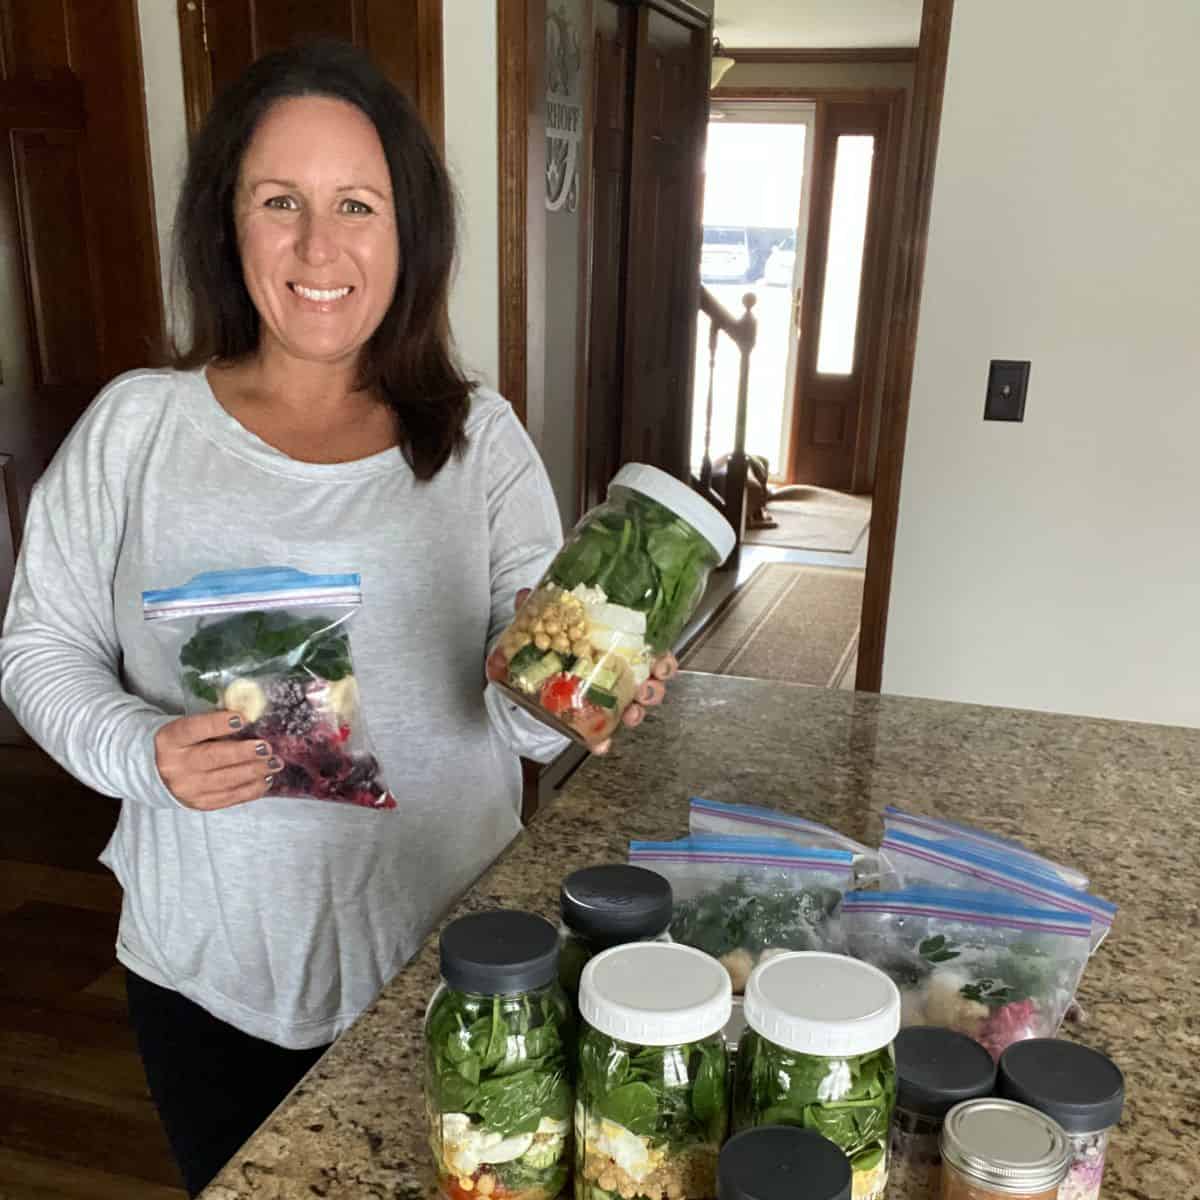 me holding a mason jar salad and smoothie kit for meal prep.